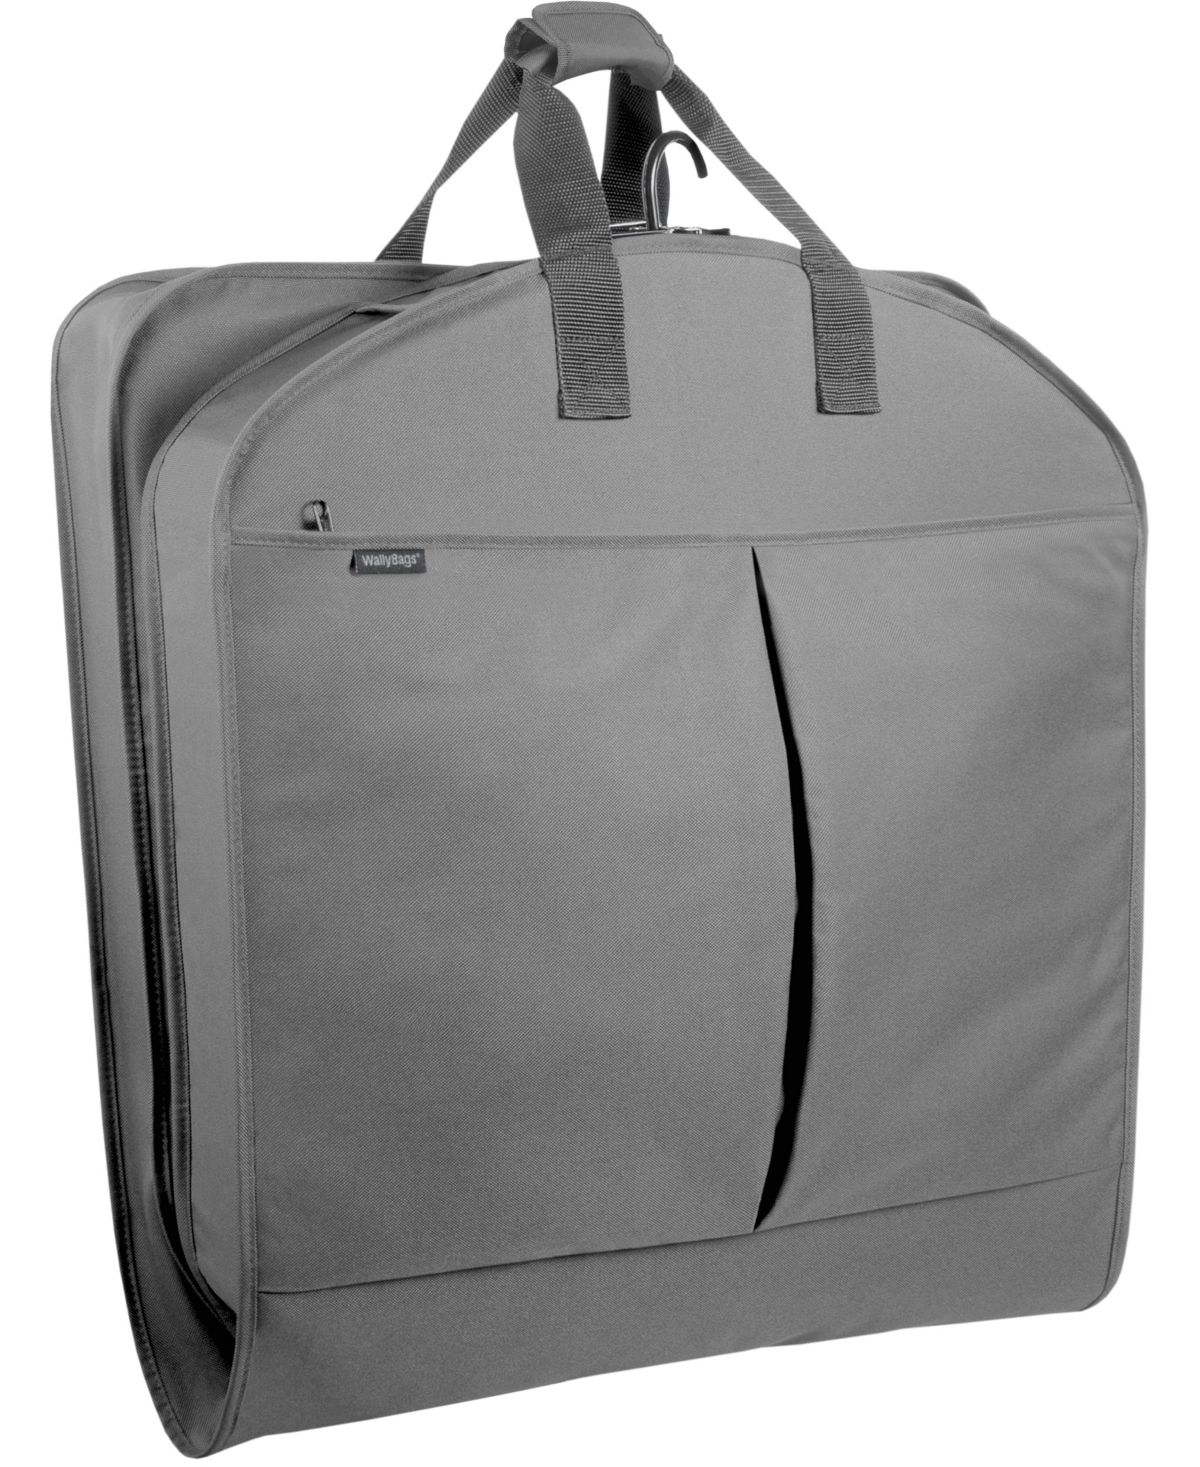 52" Deluxe Travel Garment Bag with Pockets - Gray